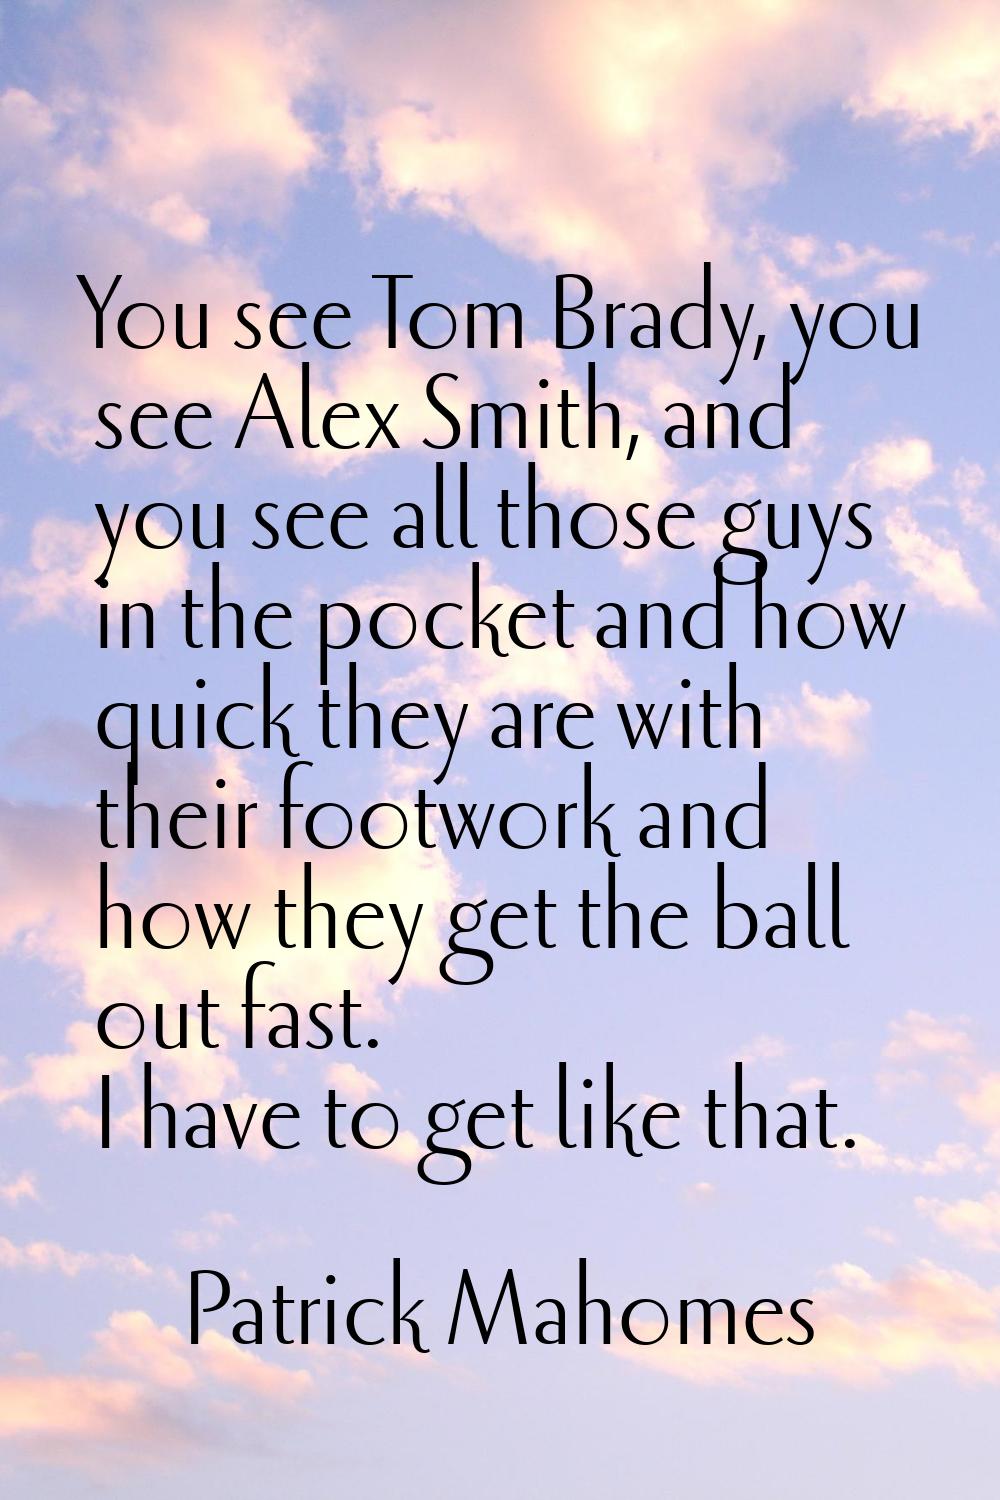 You see Tom Brady, you see Alex Smith, and you see all those guys in the pocket and how quick they 